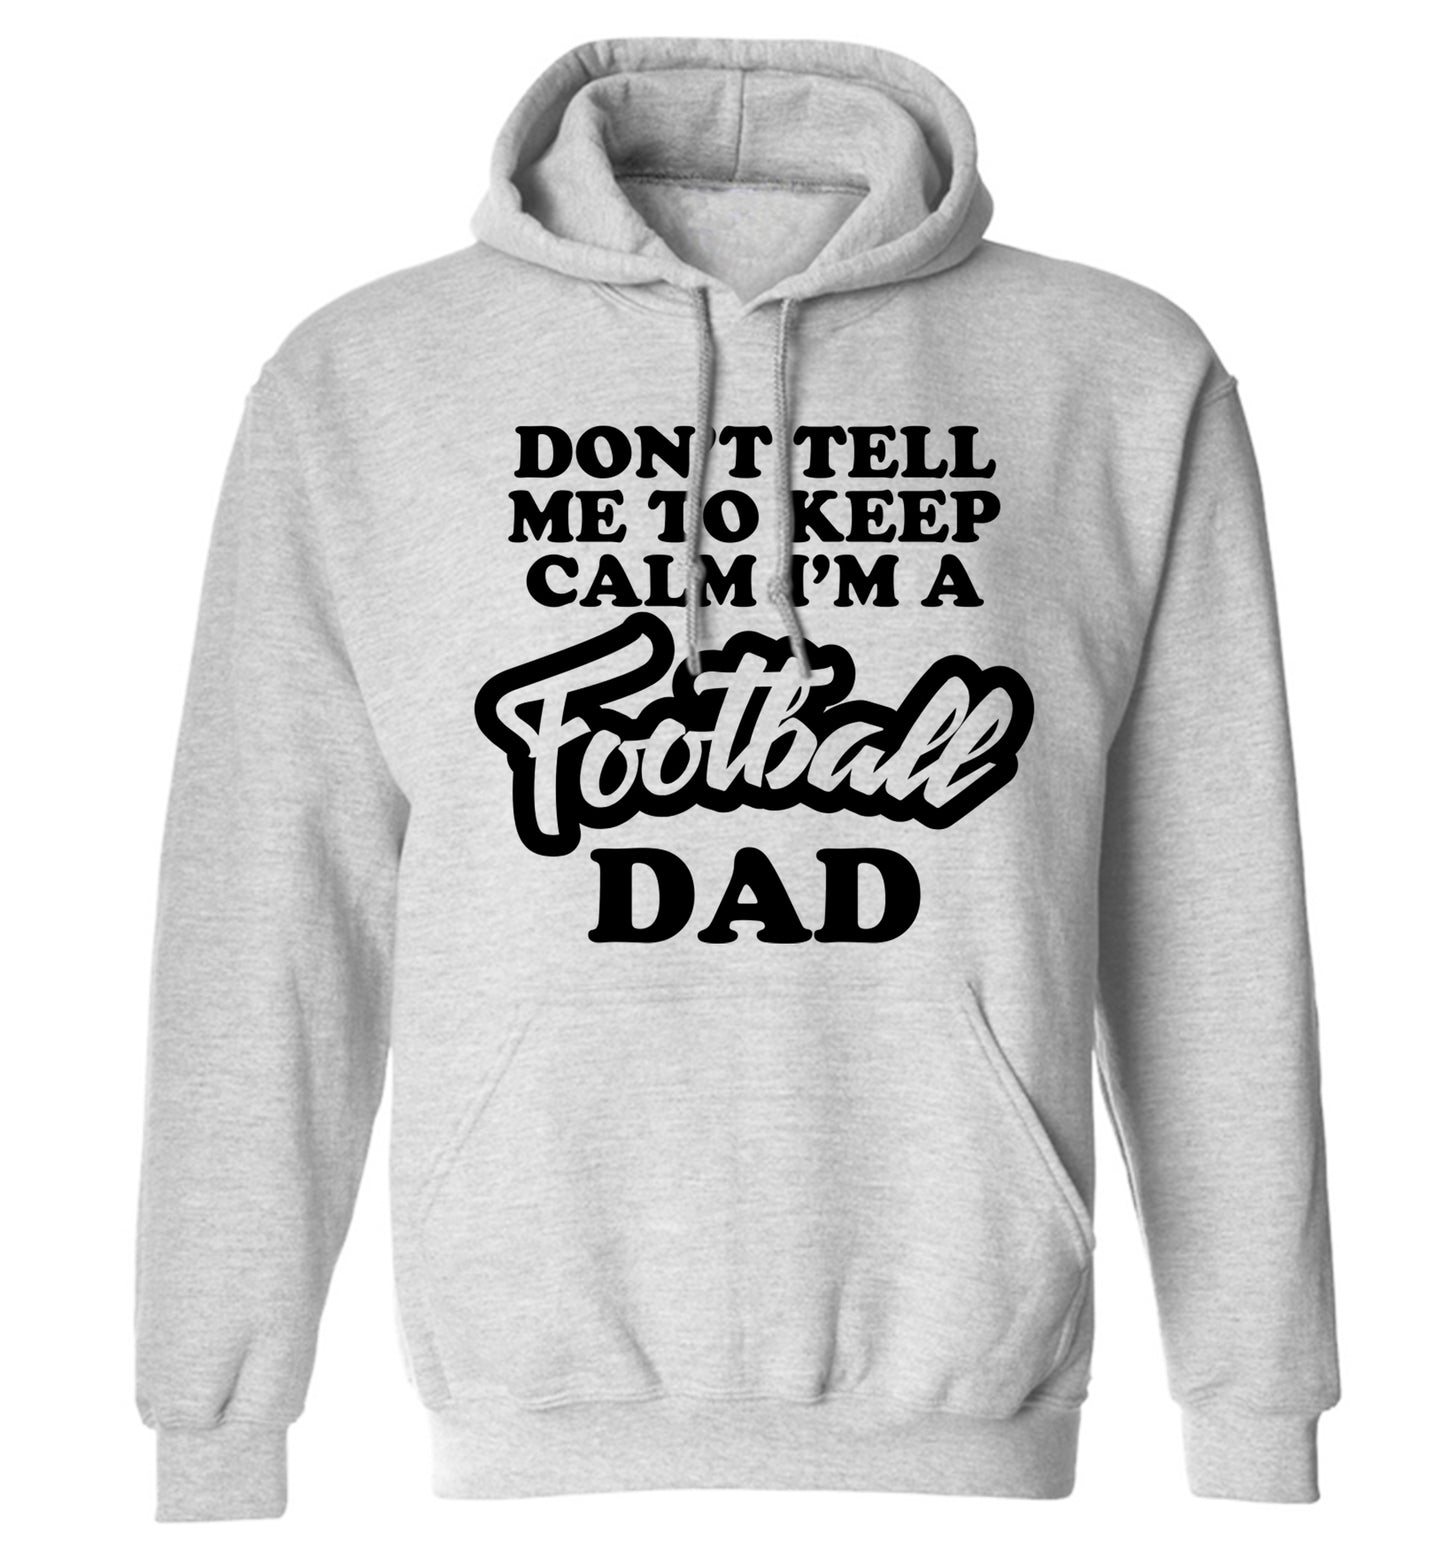 Don't tell me to keep calm I'm a football dad adults unisexgrey hoodie 2XL